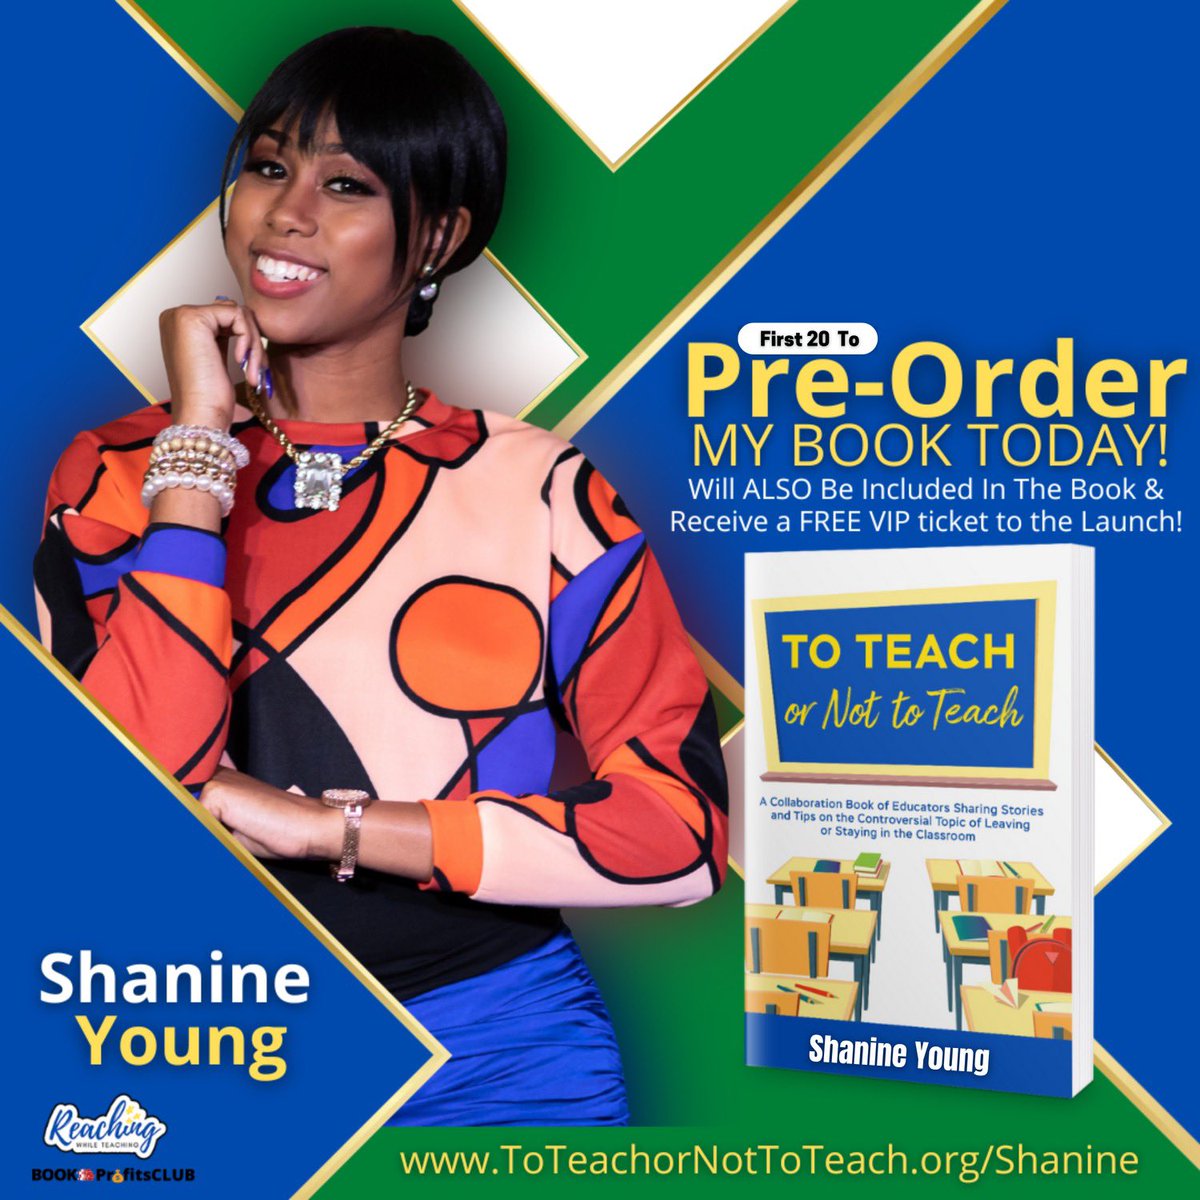 My new book “To Teach or Not to Teach” is now available for preorder and the 1st 20 people to preorder will be mentioned in the book & get a VIP ticket to the book launch and entry into our $100 raffle 🎉🎉 #toteachornottoteach